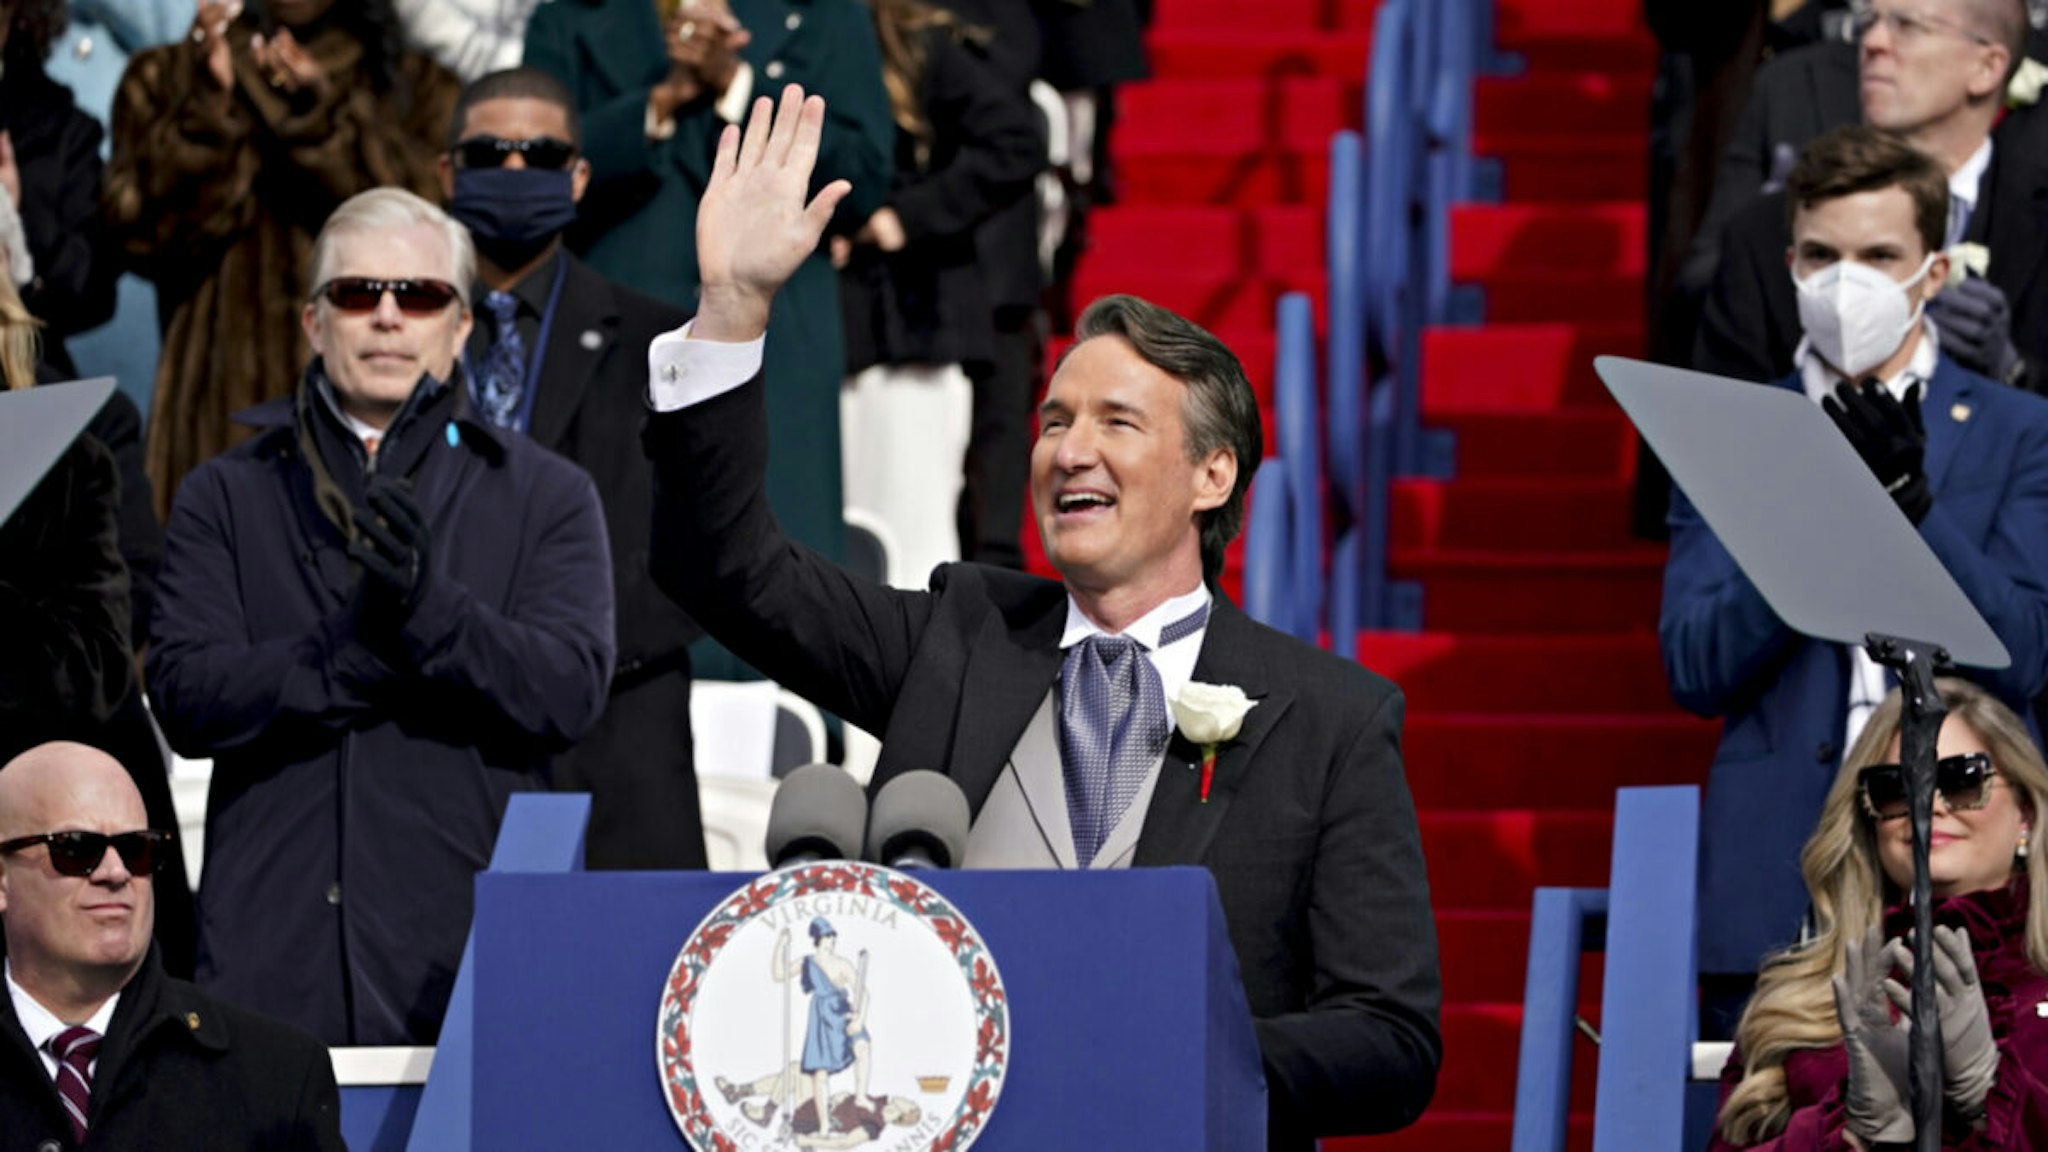 Glenn Youngkin, governor of Virginia, waves while speaking after being sworn in during an inauguration ceremony at Capitol Square in Richmond, Virginia, U.S., on Saturday, Jan. 15, 2022.